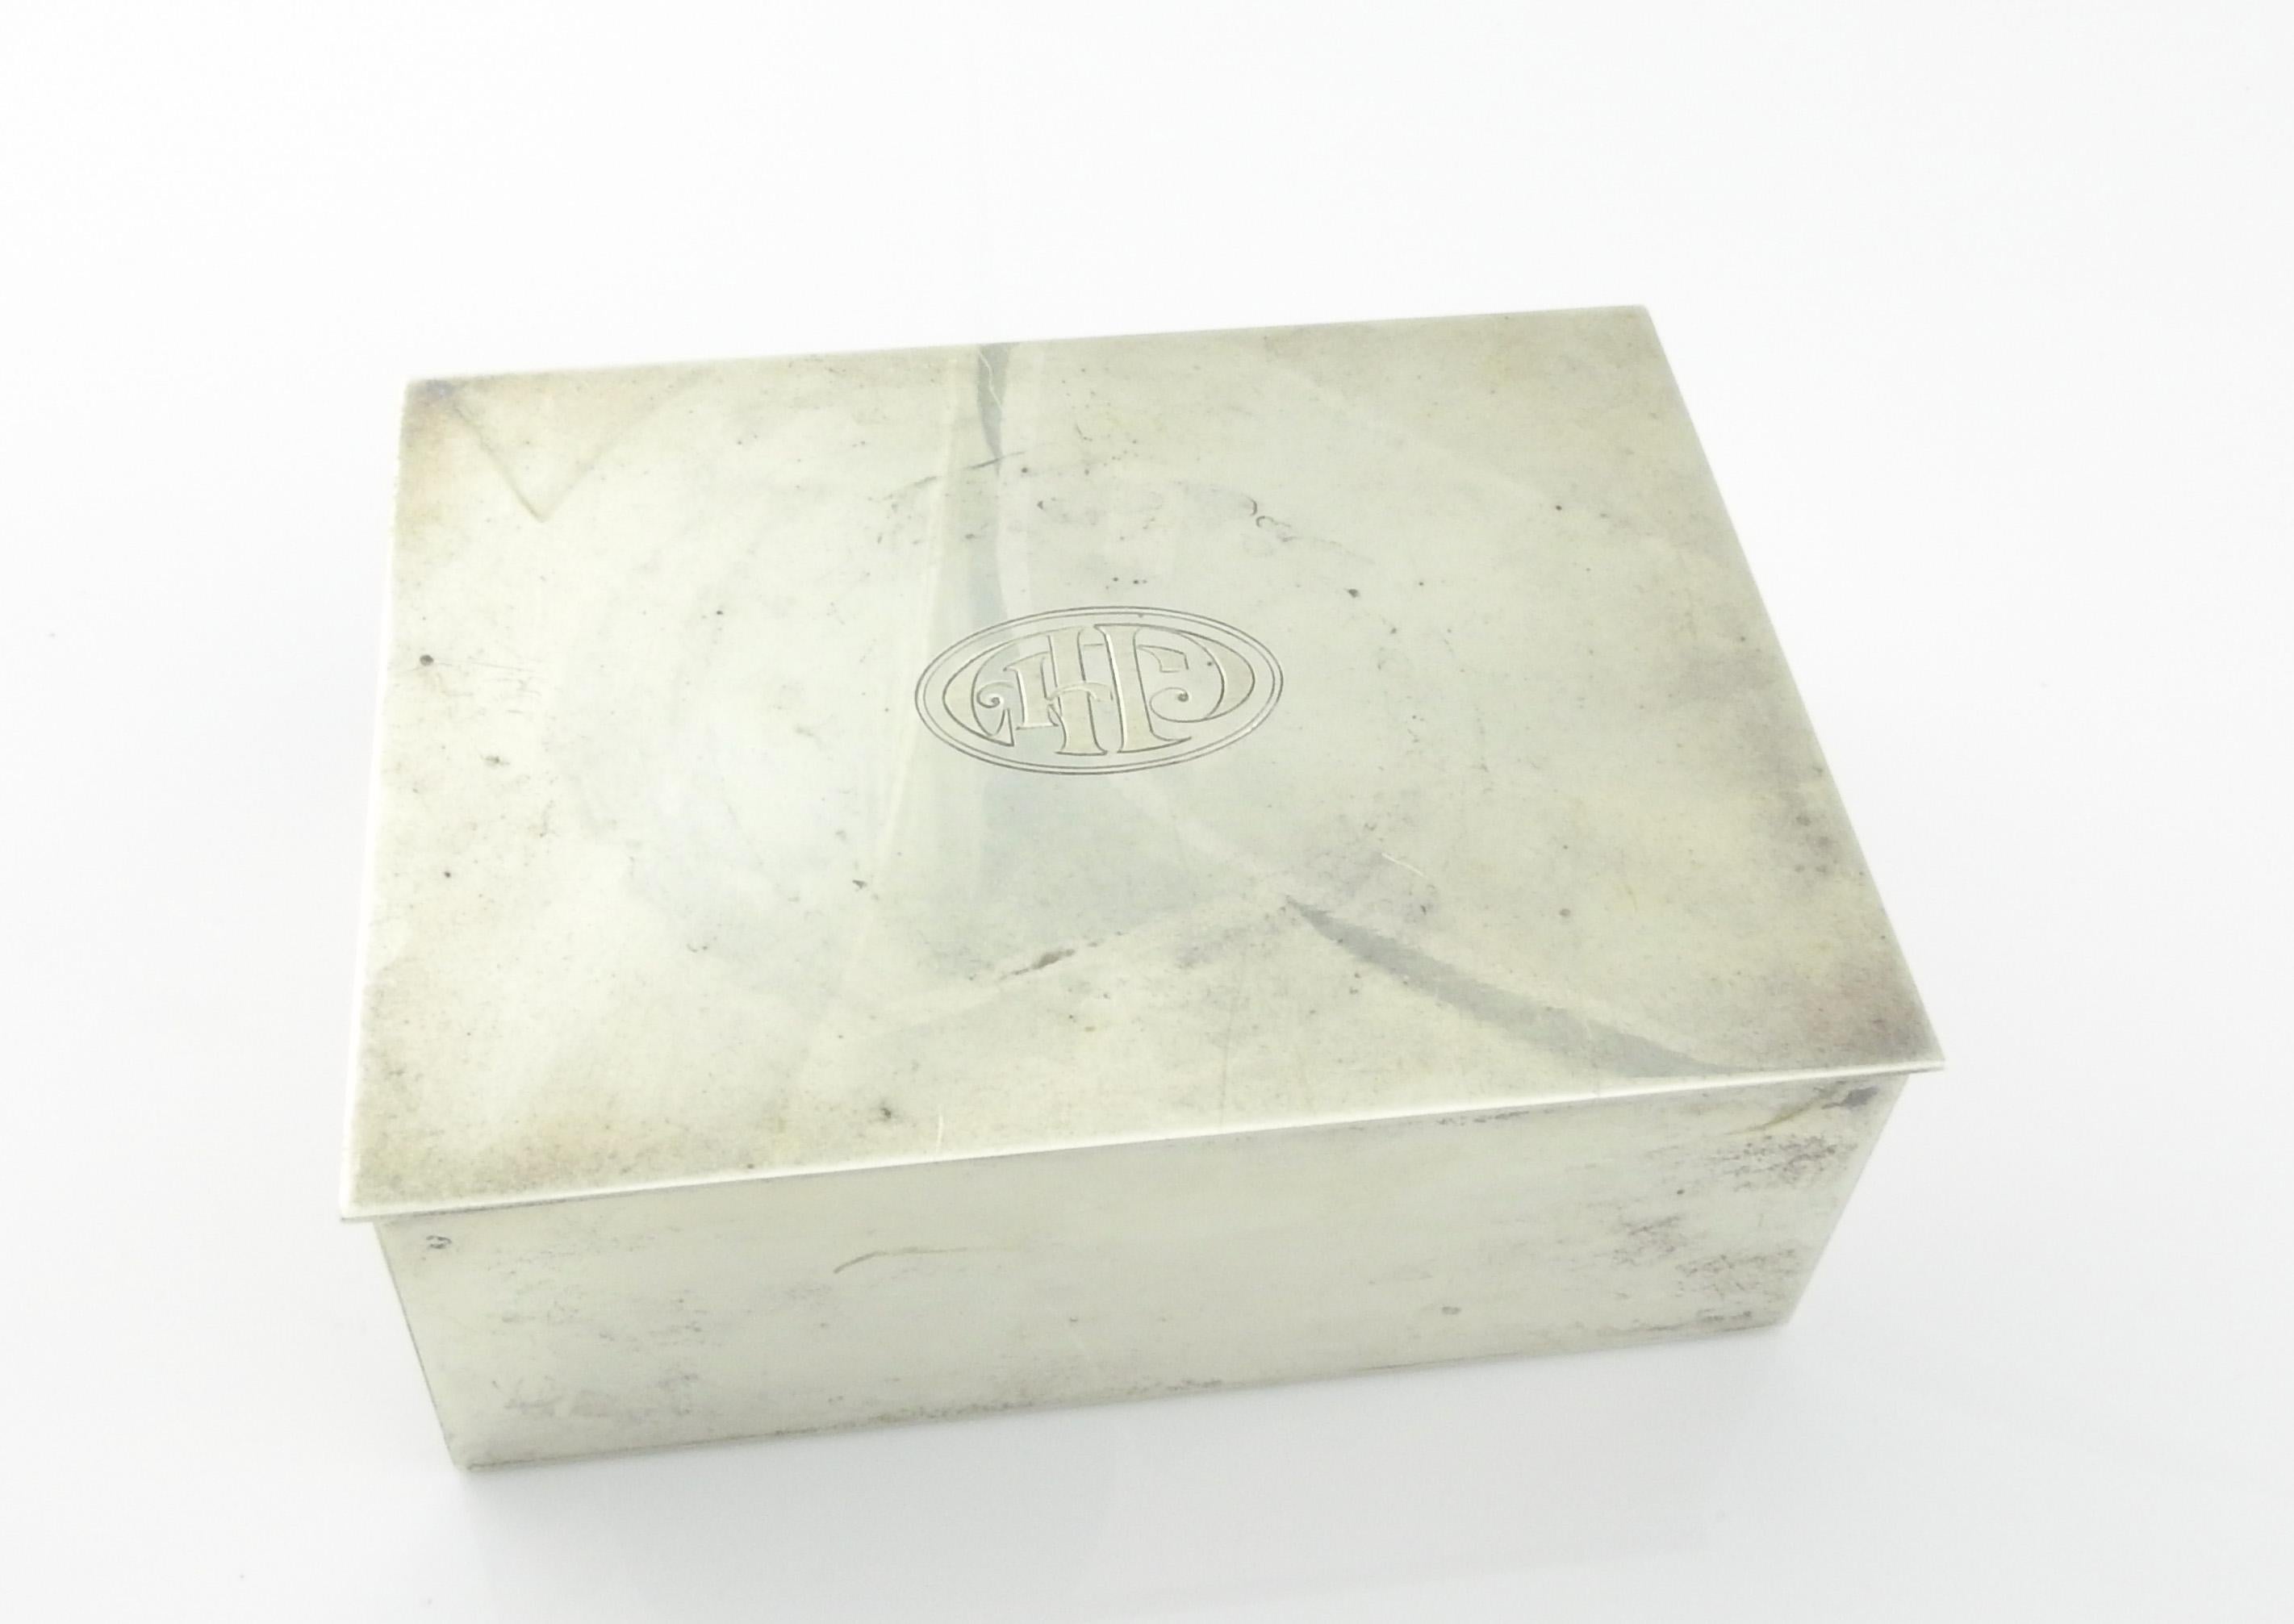 Tiffany & Co Sterling Silver Trinket Box

This is a lovely sterling silver trinket box designed by Tiffany & Co.

Measurements:  It measures approximately 4-3/8